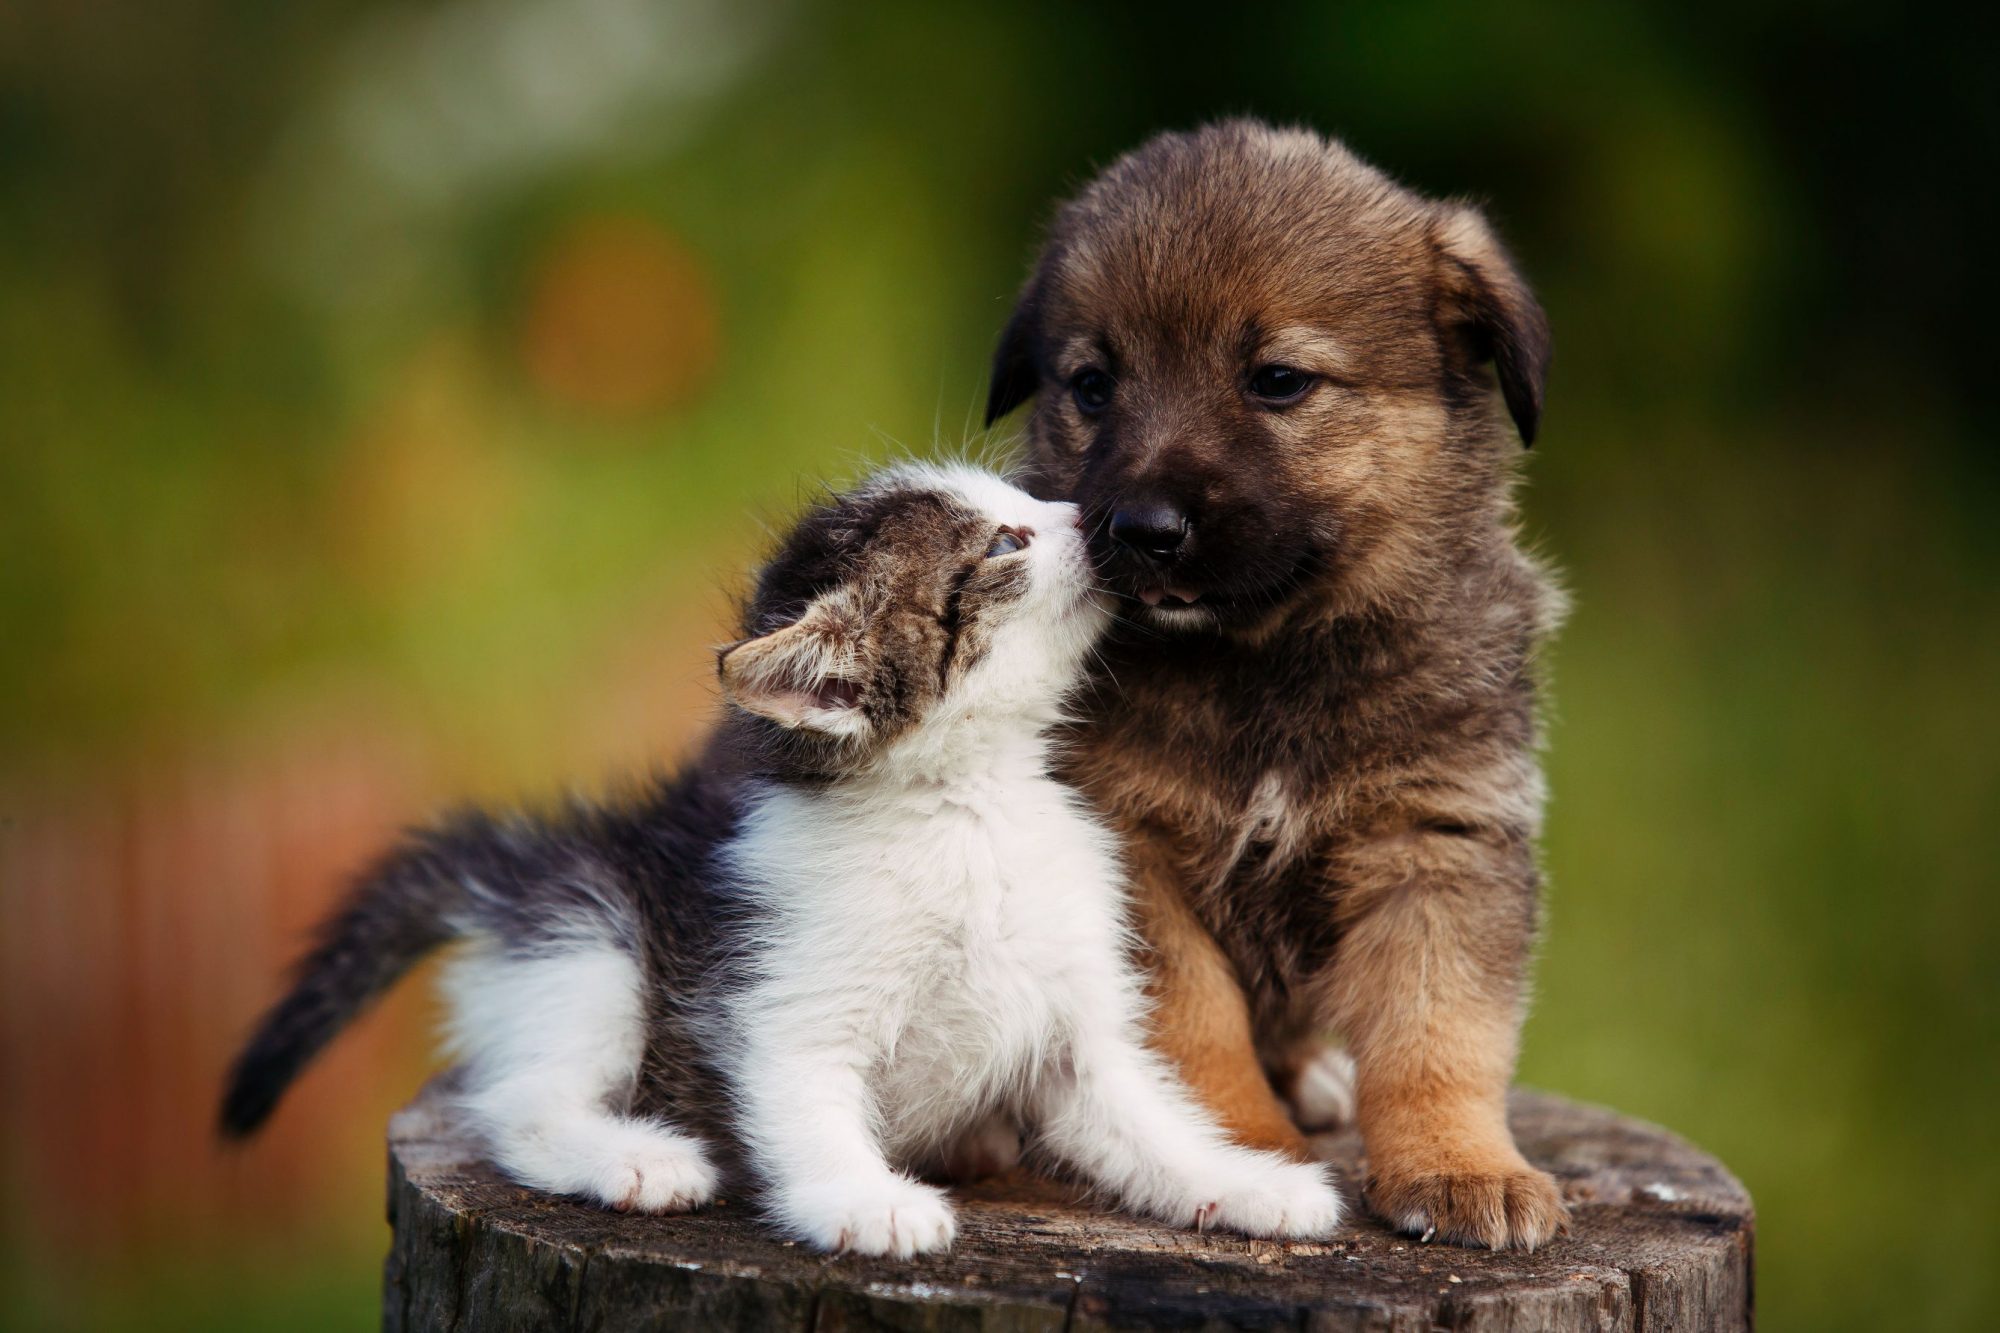 Cute puppy and kitten. 